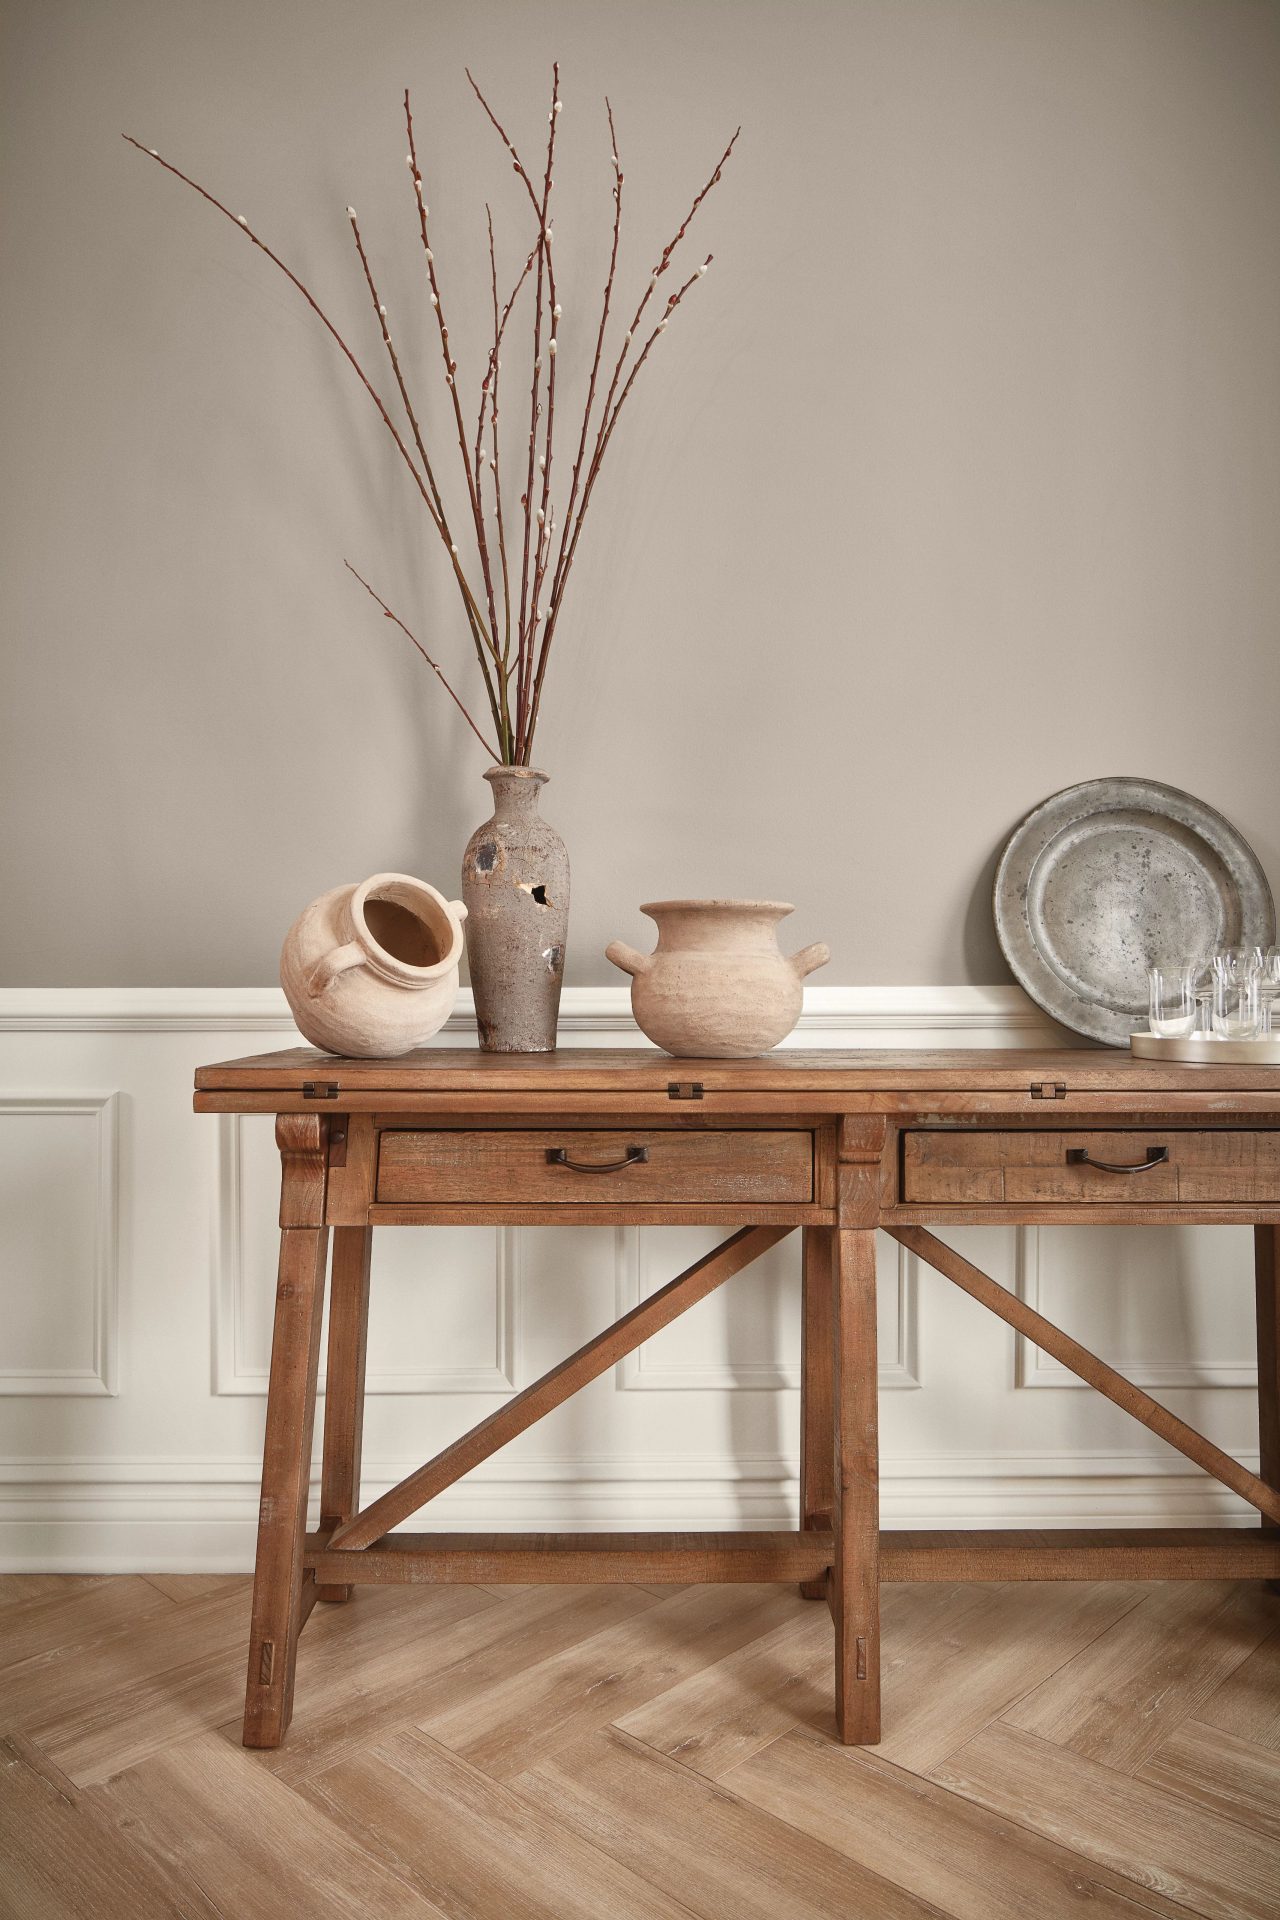 A console table with decor on top along a wall painted Fawn Brindle SW 7640.